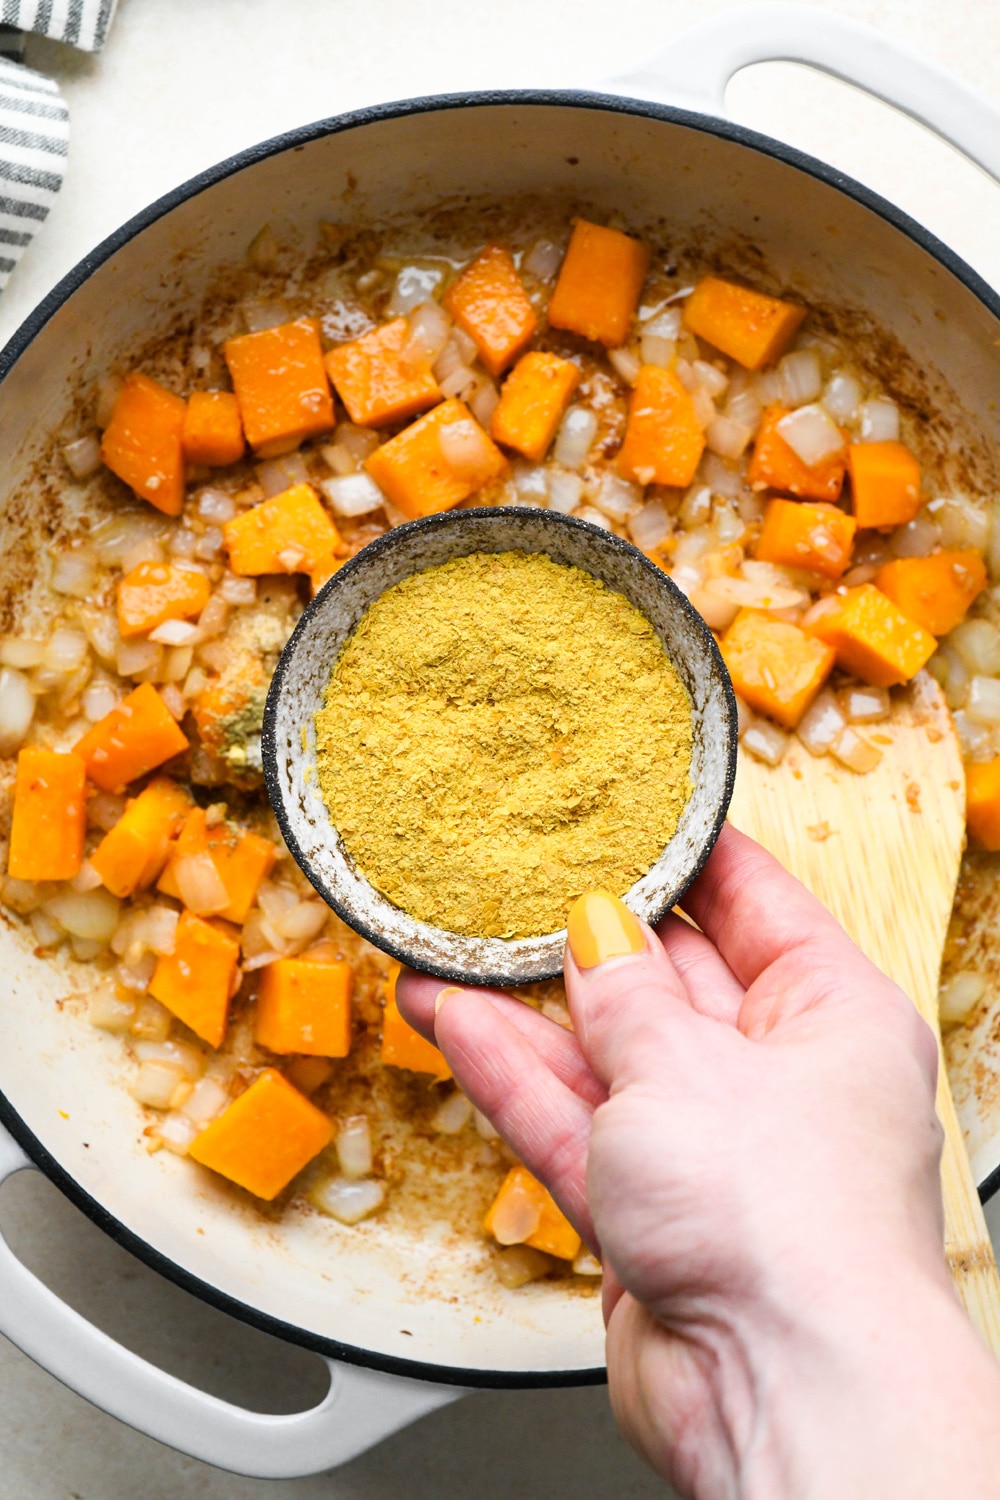 How to make Dairy Free Butternut Squash Pasta: Small dish of nutritional yeast being held above the sautéed butternut squash, onions, and garlic to demonstrate adding it to the skillet. 